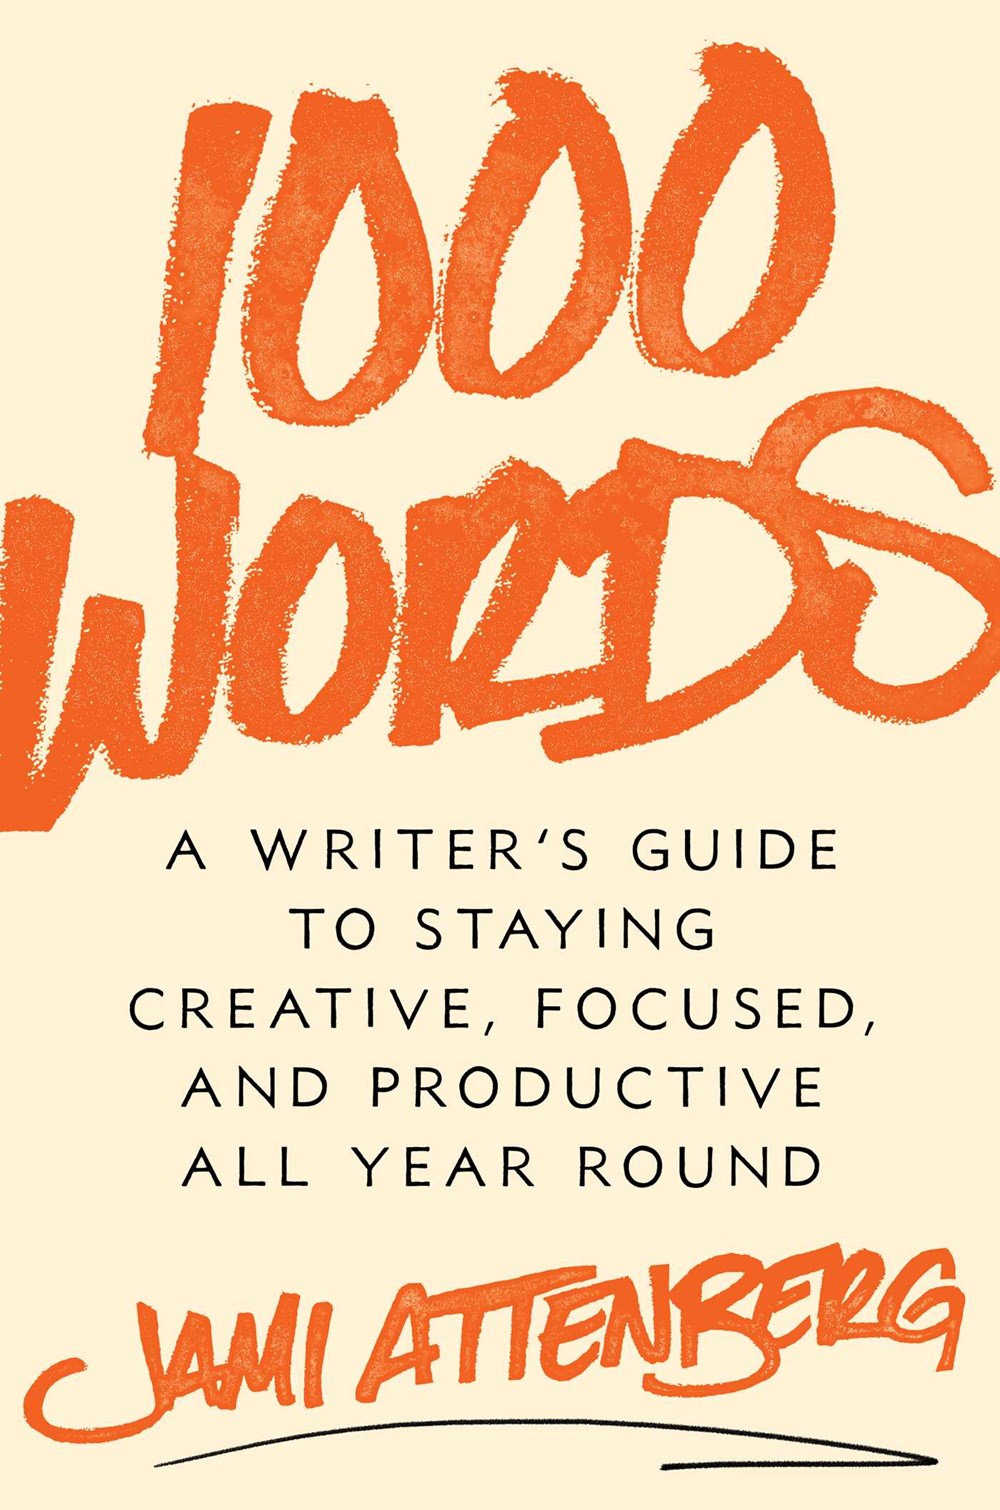 1000 Words: A Writer's Guide to Staying Creative, Focused, and Productive All Year Round by Jami Attenberg (1/9/24)